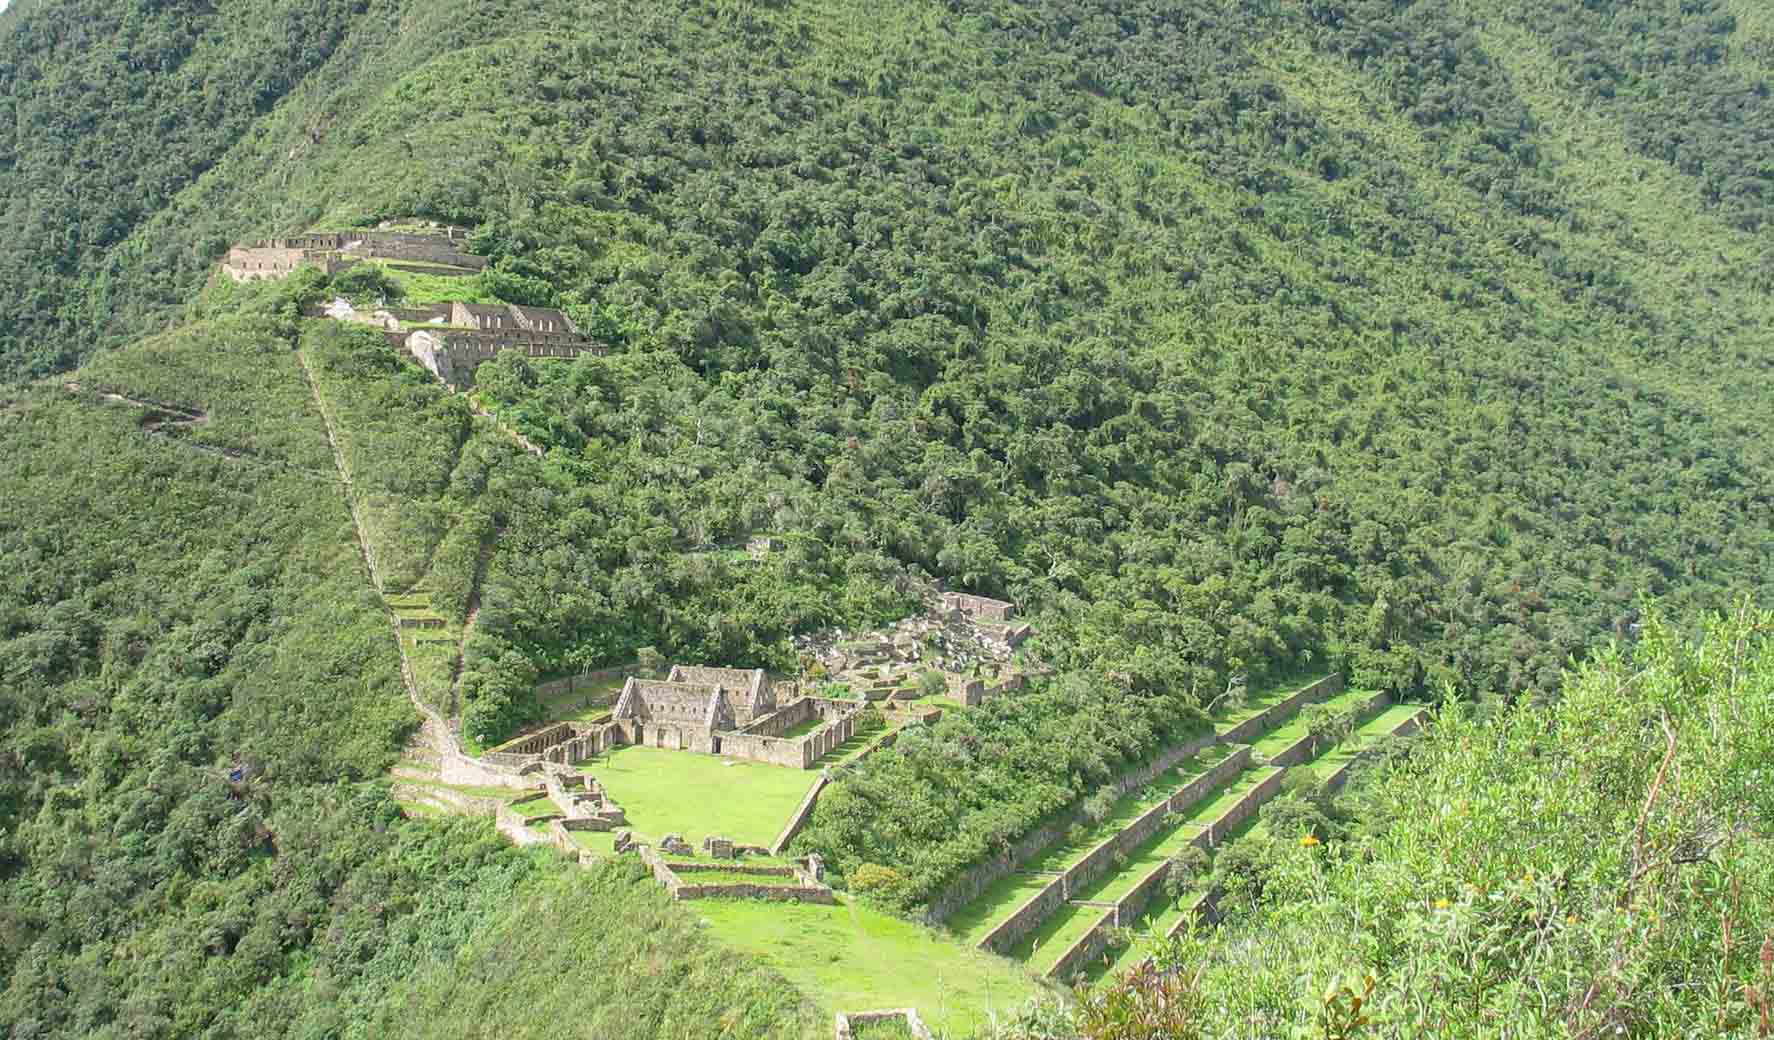 Several levels of stone ruins known as Choquequirao with surrounding greenery on a mountainside.